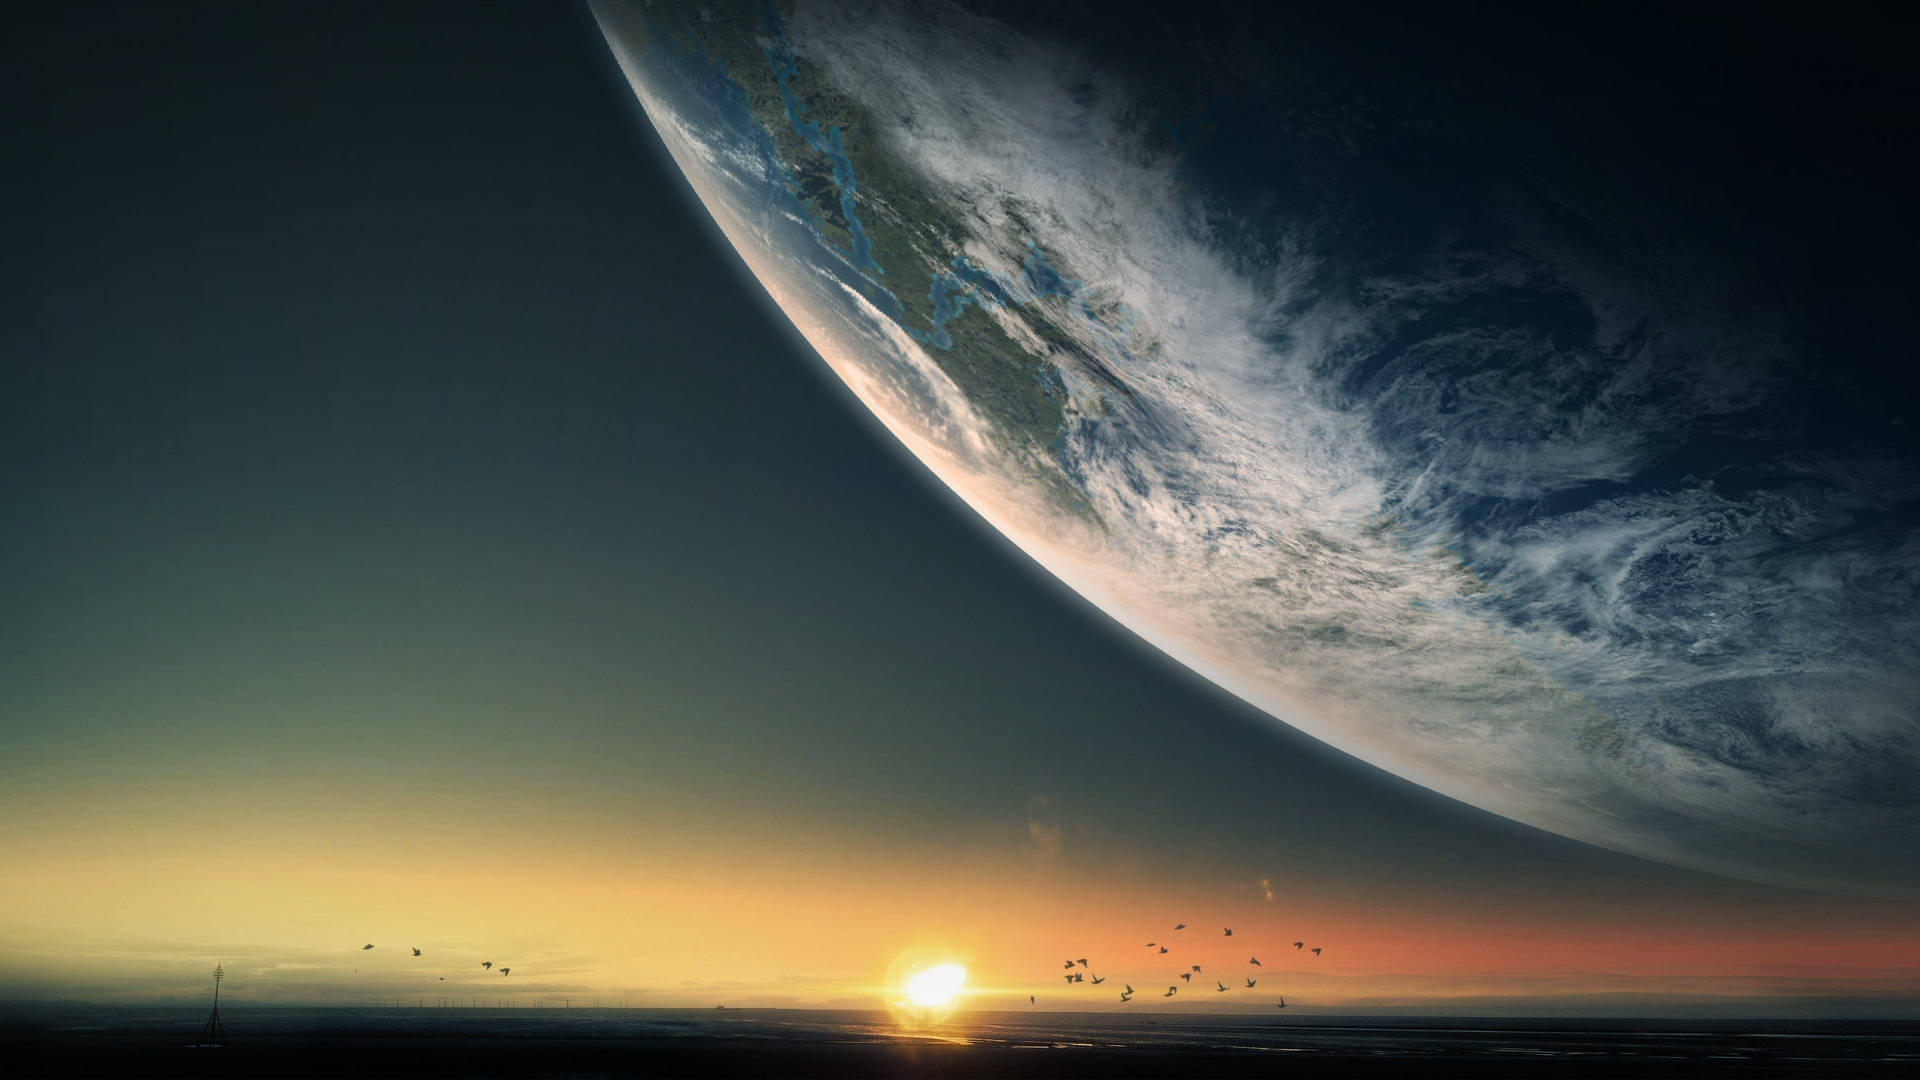 Download 4k Ultra Hd 2160p Planet And Sunrise Wallpaper 